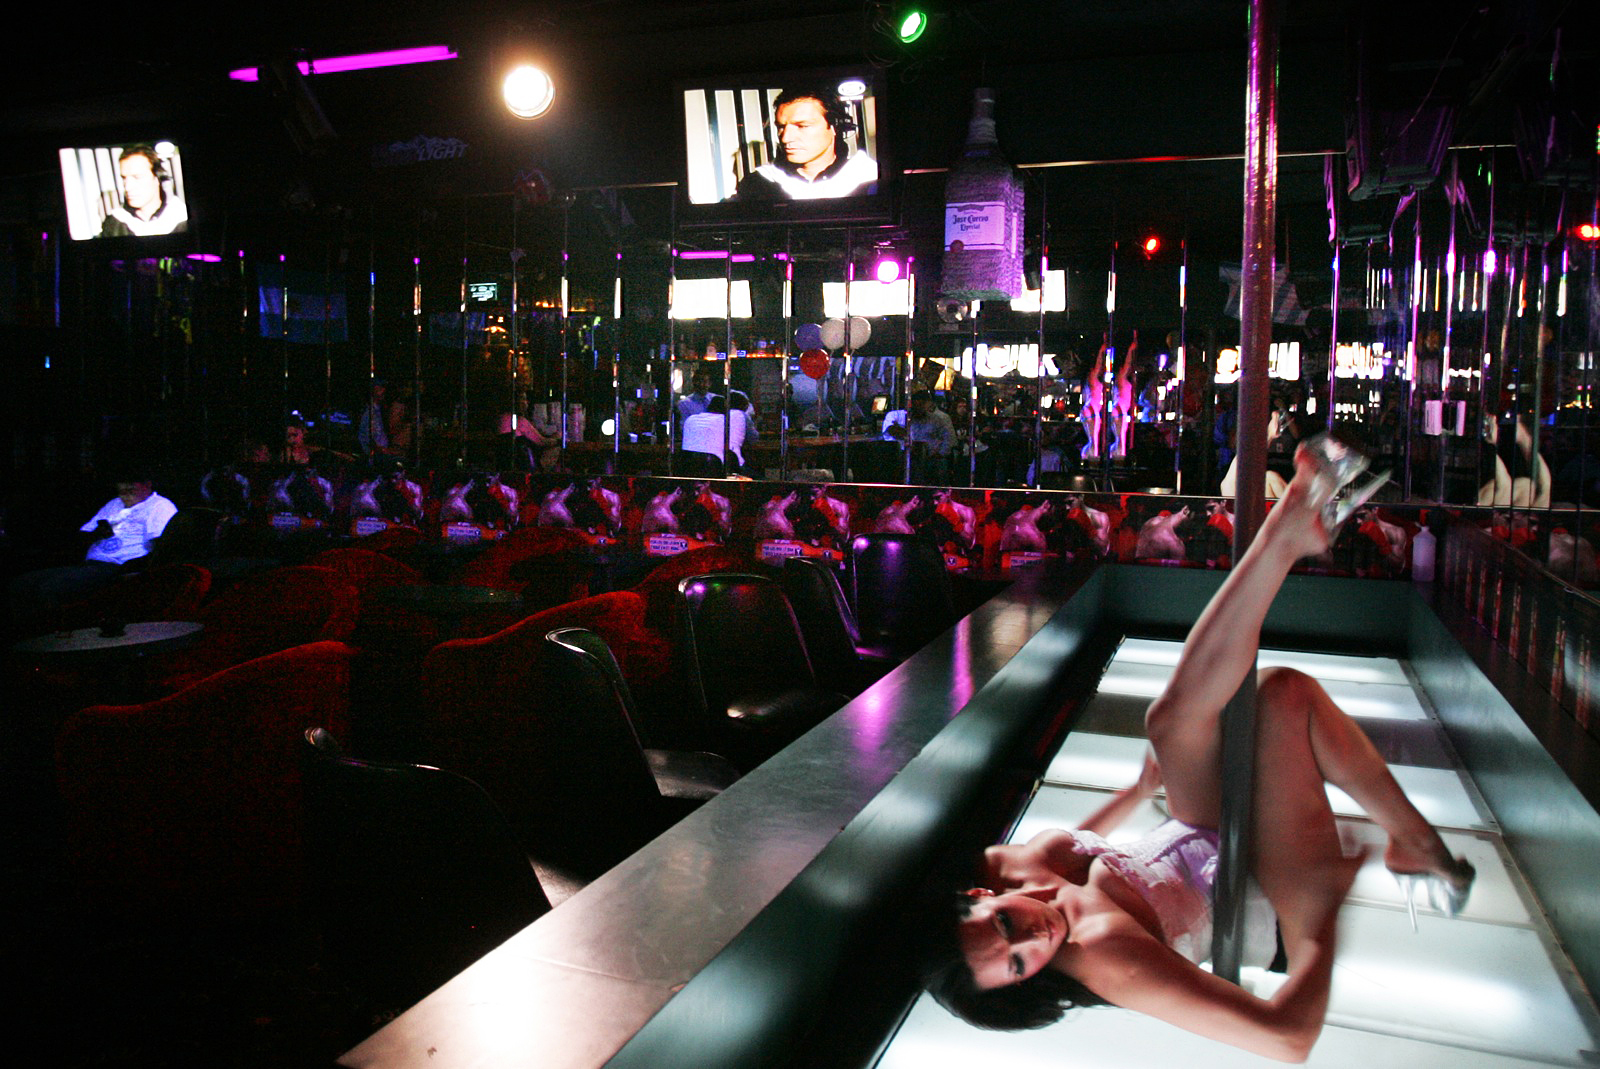 Classics to dives A photo tour of eight kinds of strip clubs in Las Vegas  pic